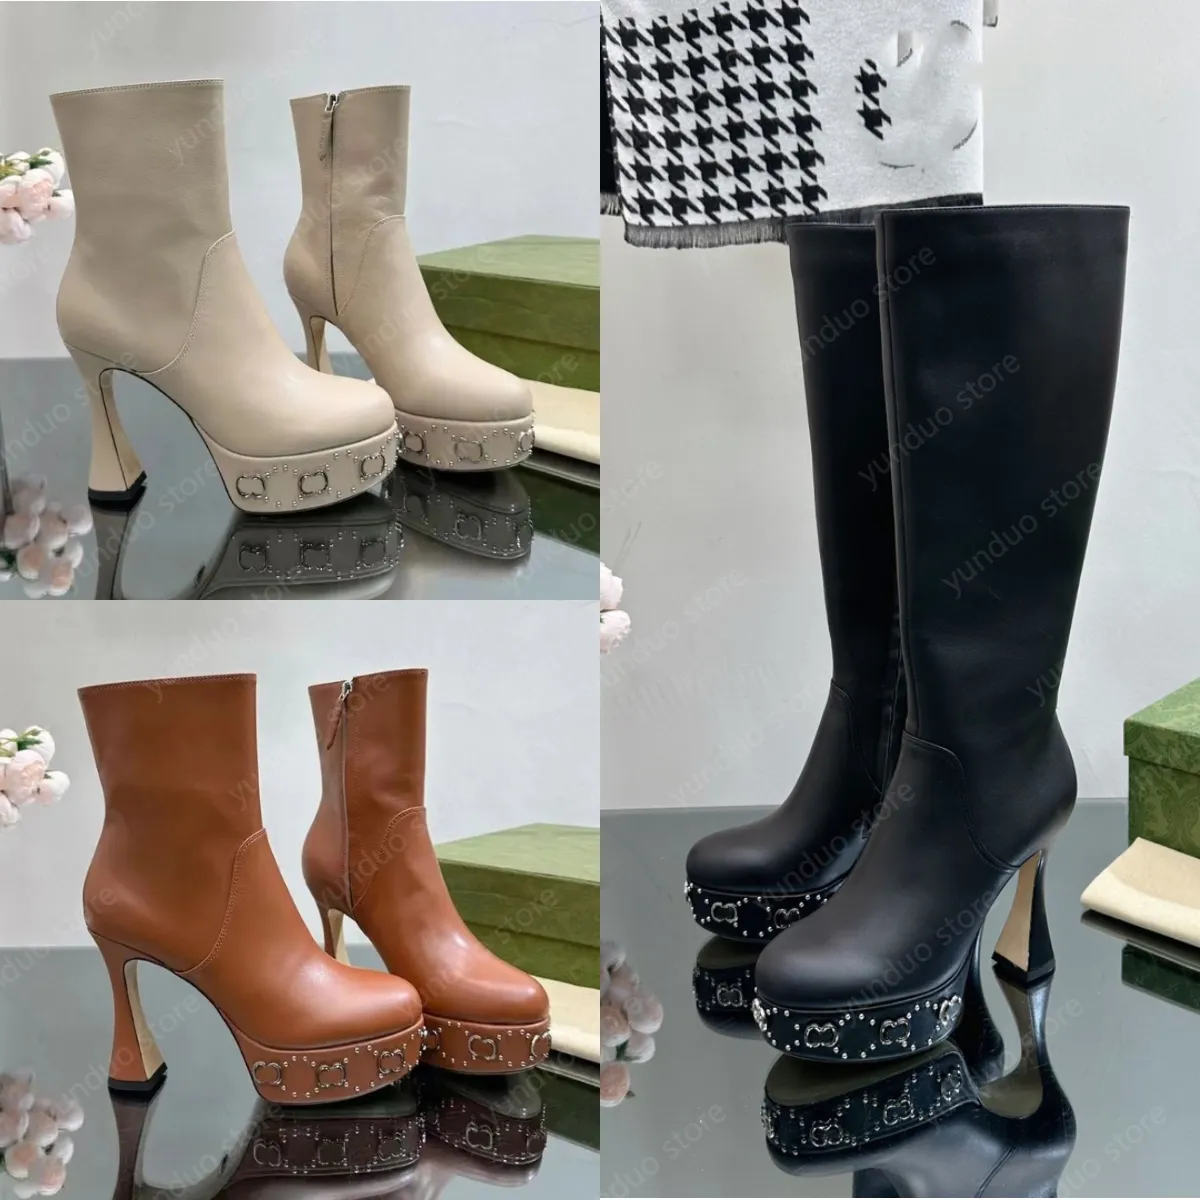 Platform boot wlth Studs Genuine Leather Round Toes Chunky Heel Fashion Boots Women s 14mm Luxury Designer Ankle Boots High-heeled Knight Boots